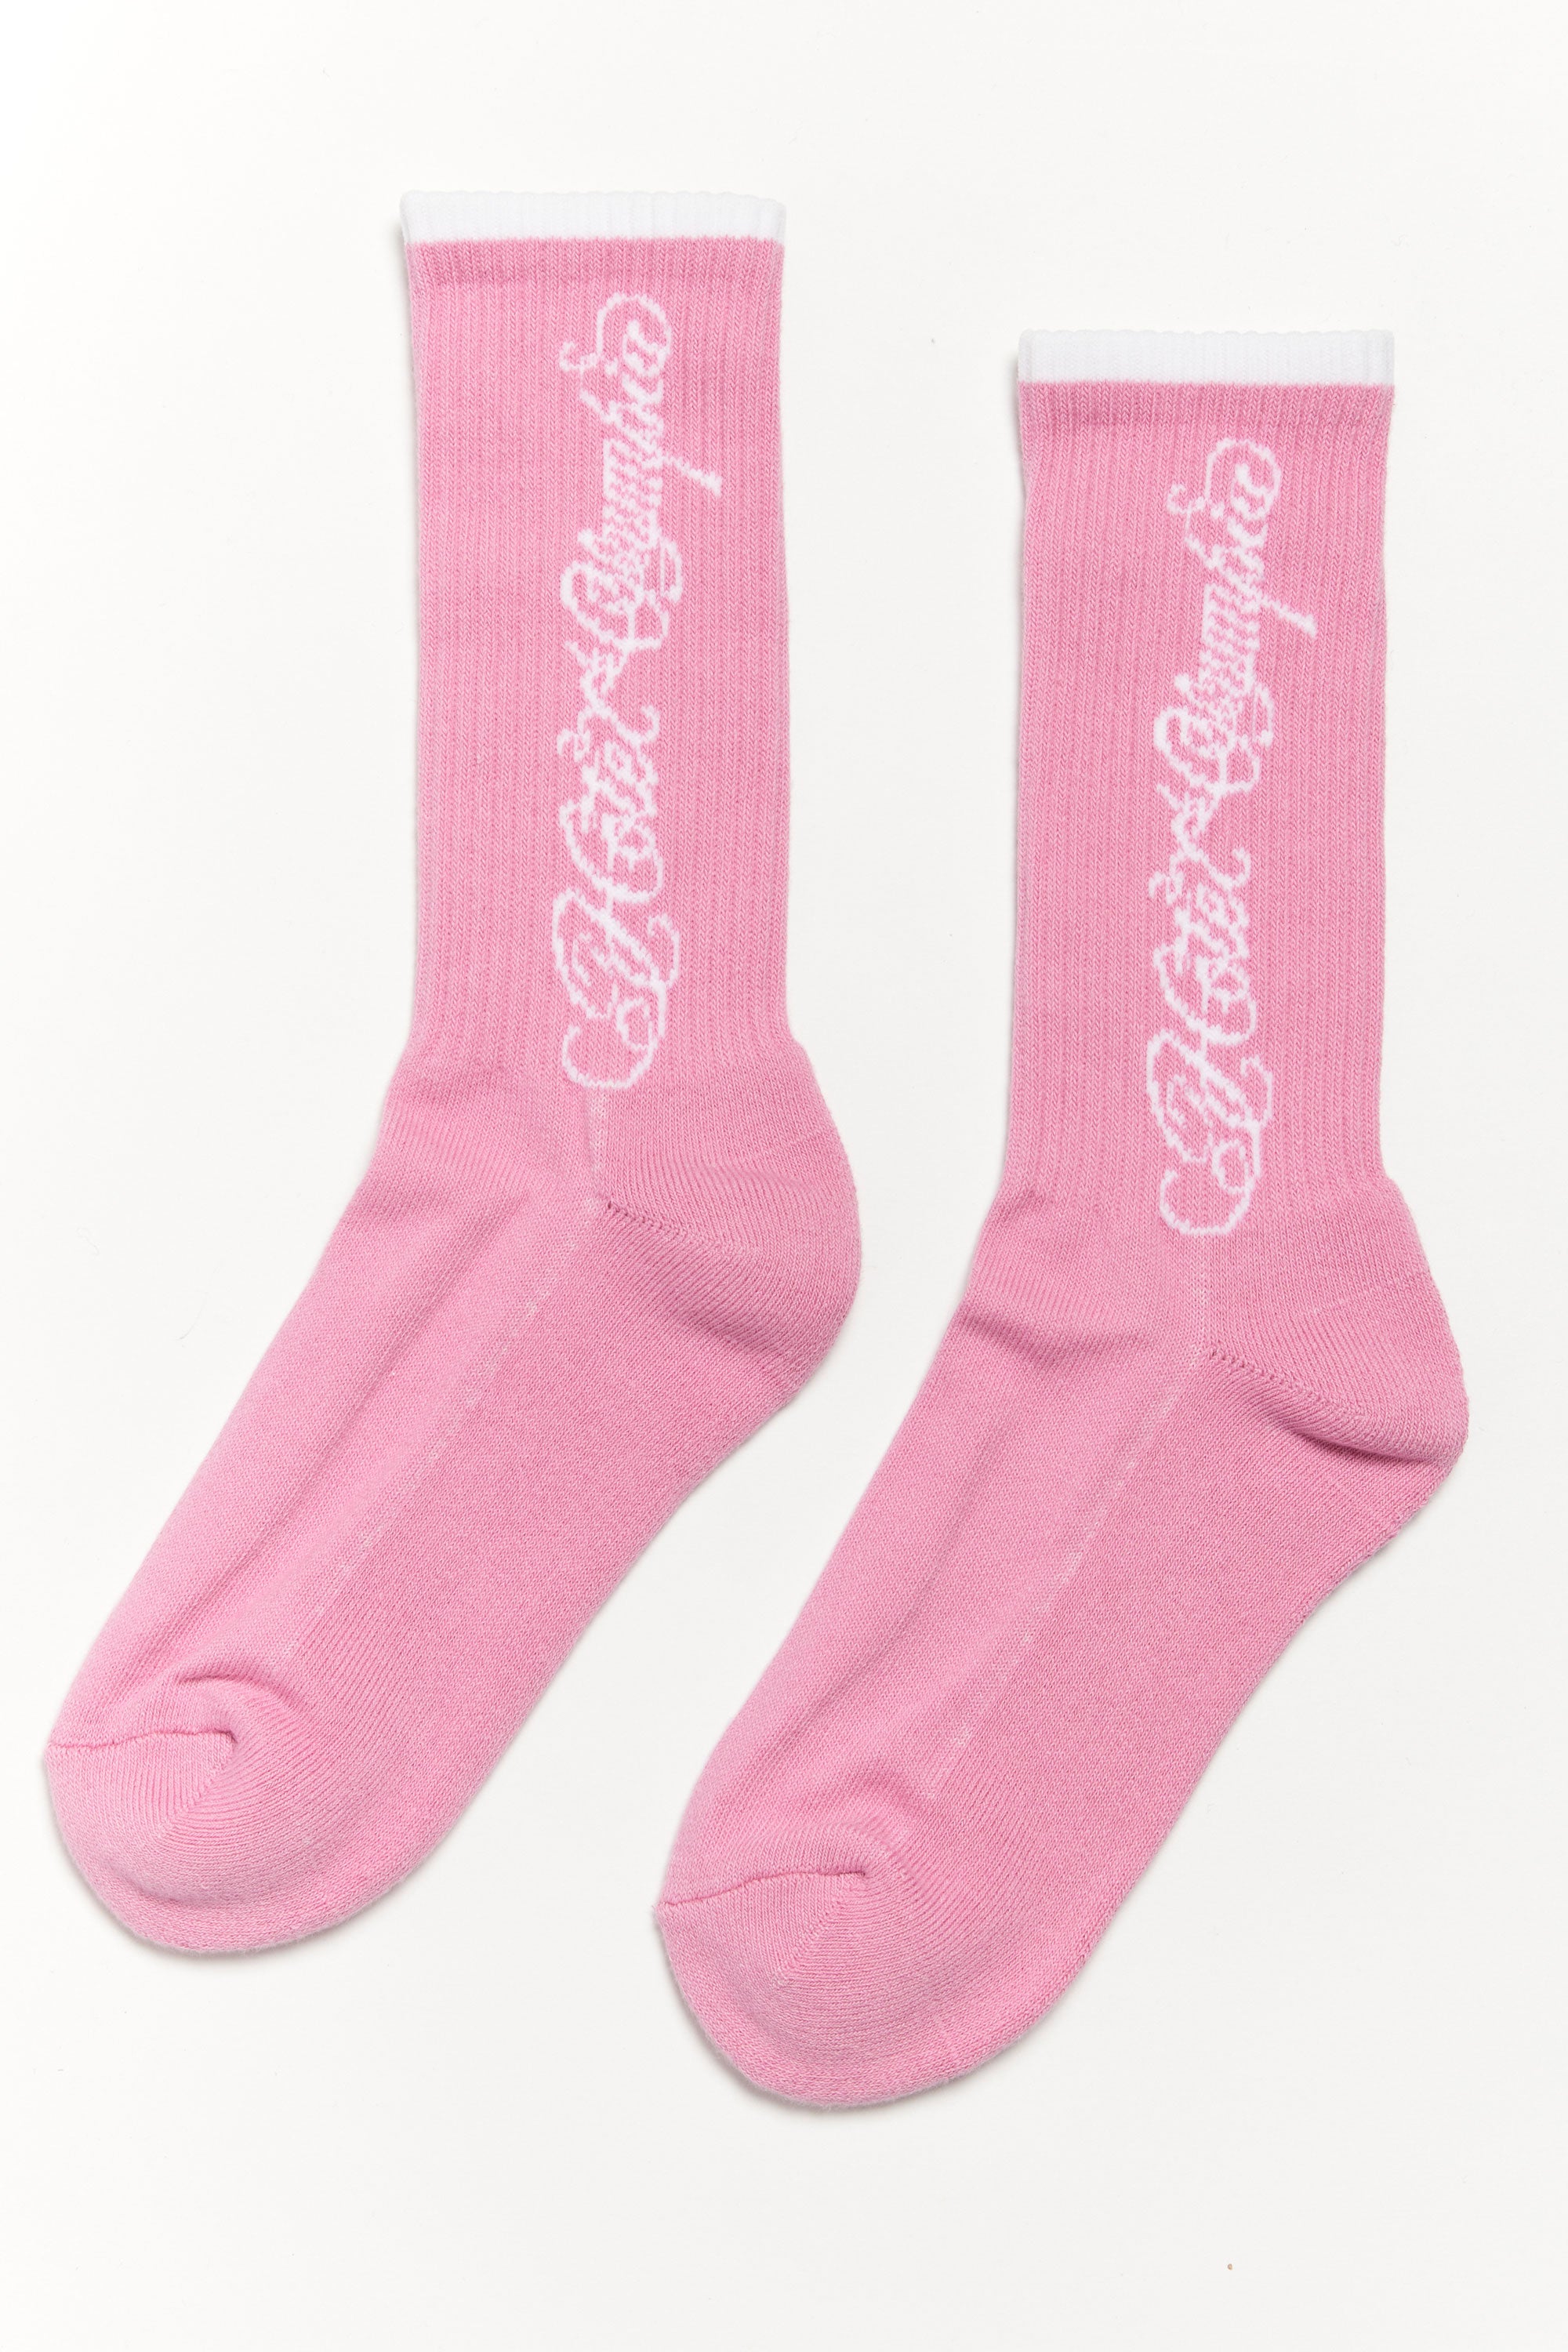 The HOTEL OLYMPIA - H.O. SPORT SOCKS PINK available online with global shipping, and in PAM Stores Melbourne and Sydney.